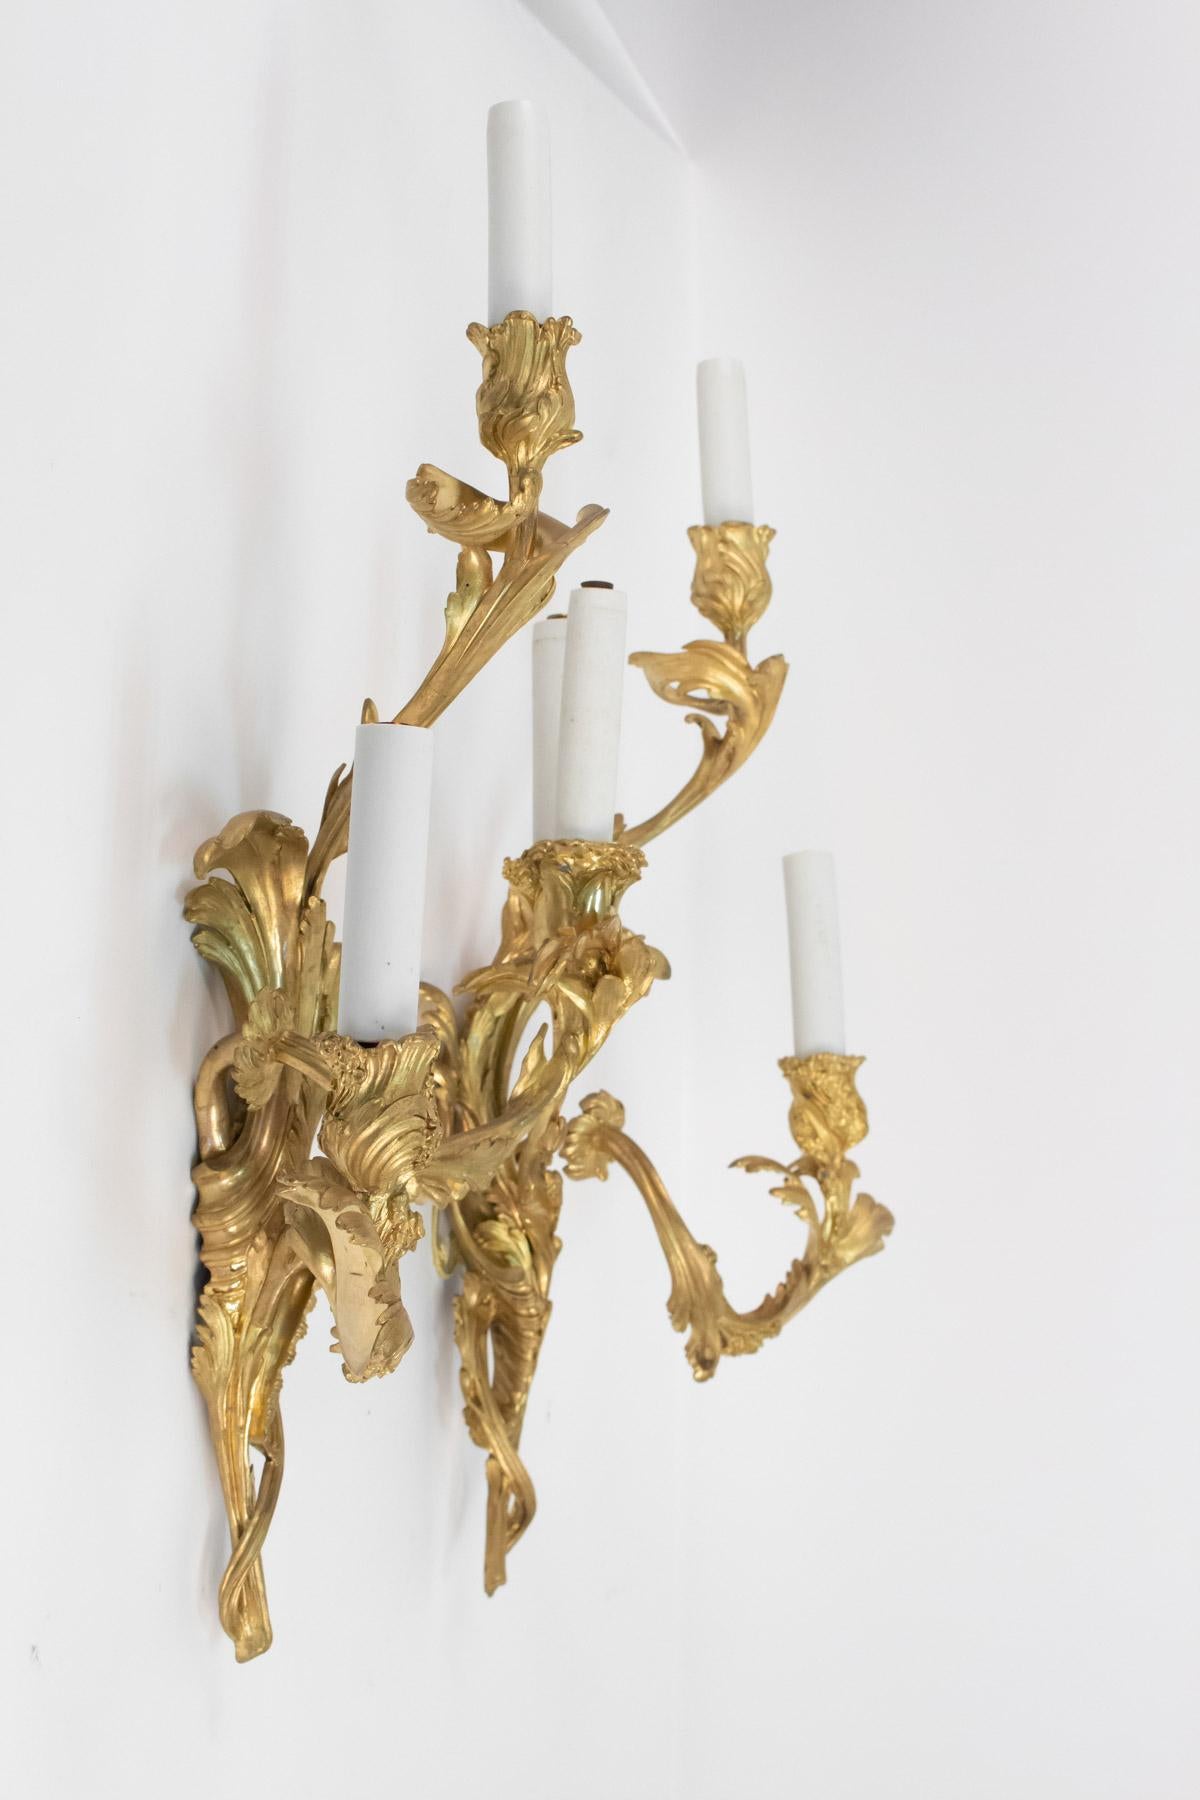 Pair of Gilt Bronze Sconces from the 19th Century in Louis XV Style 6